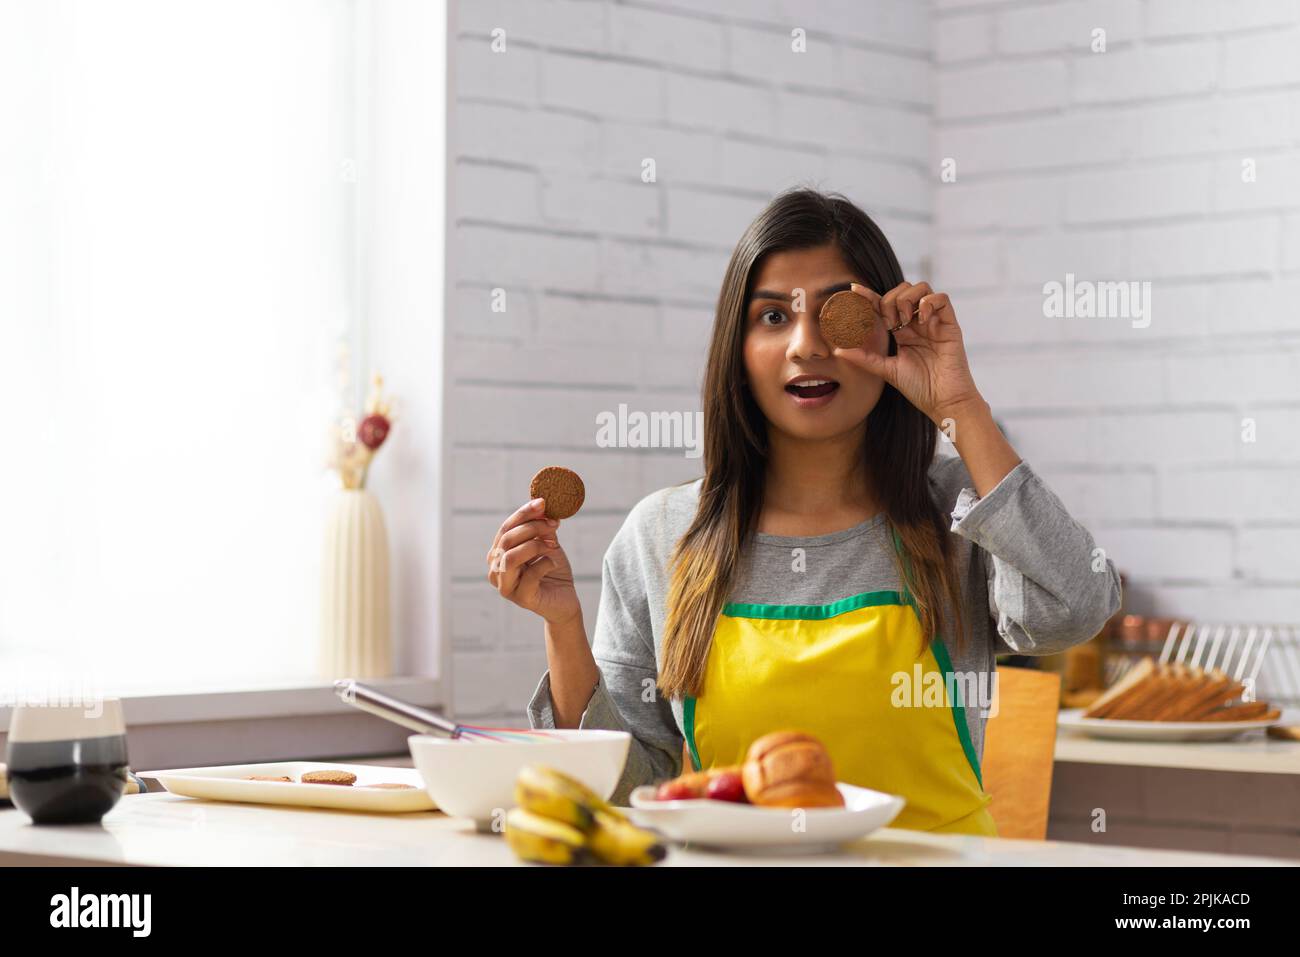 Woman enjoying her breakfast with cookies in kitchen Stock Photo